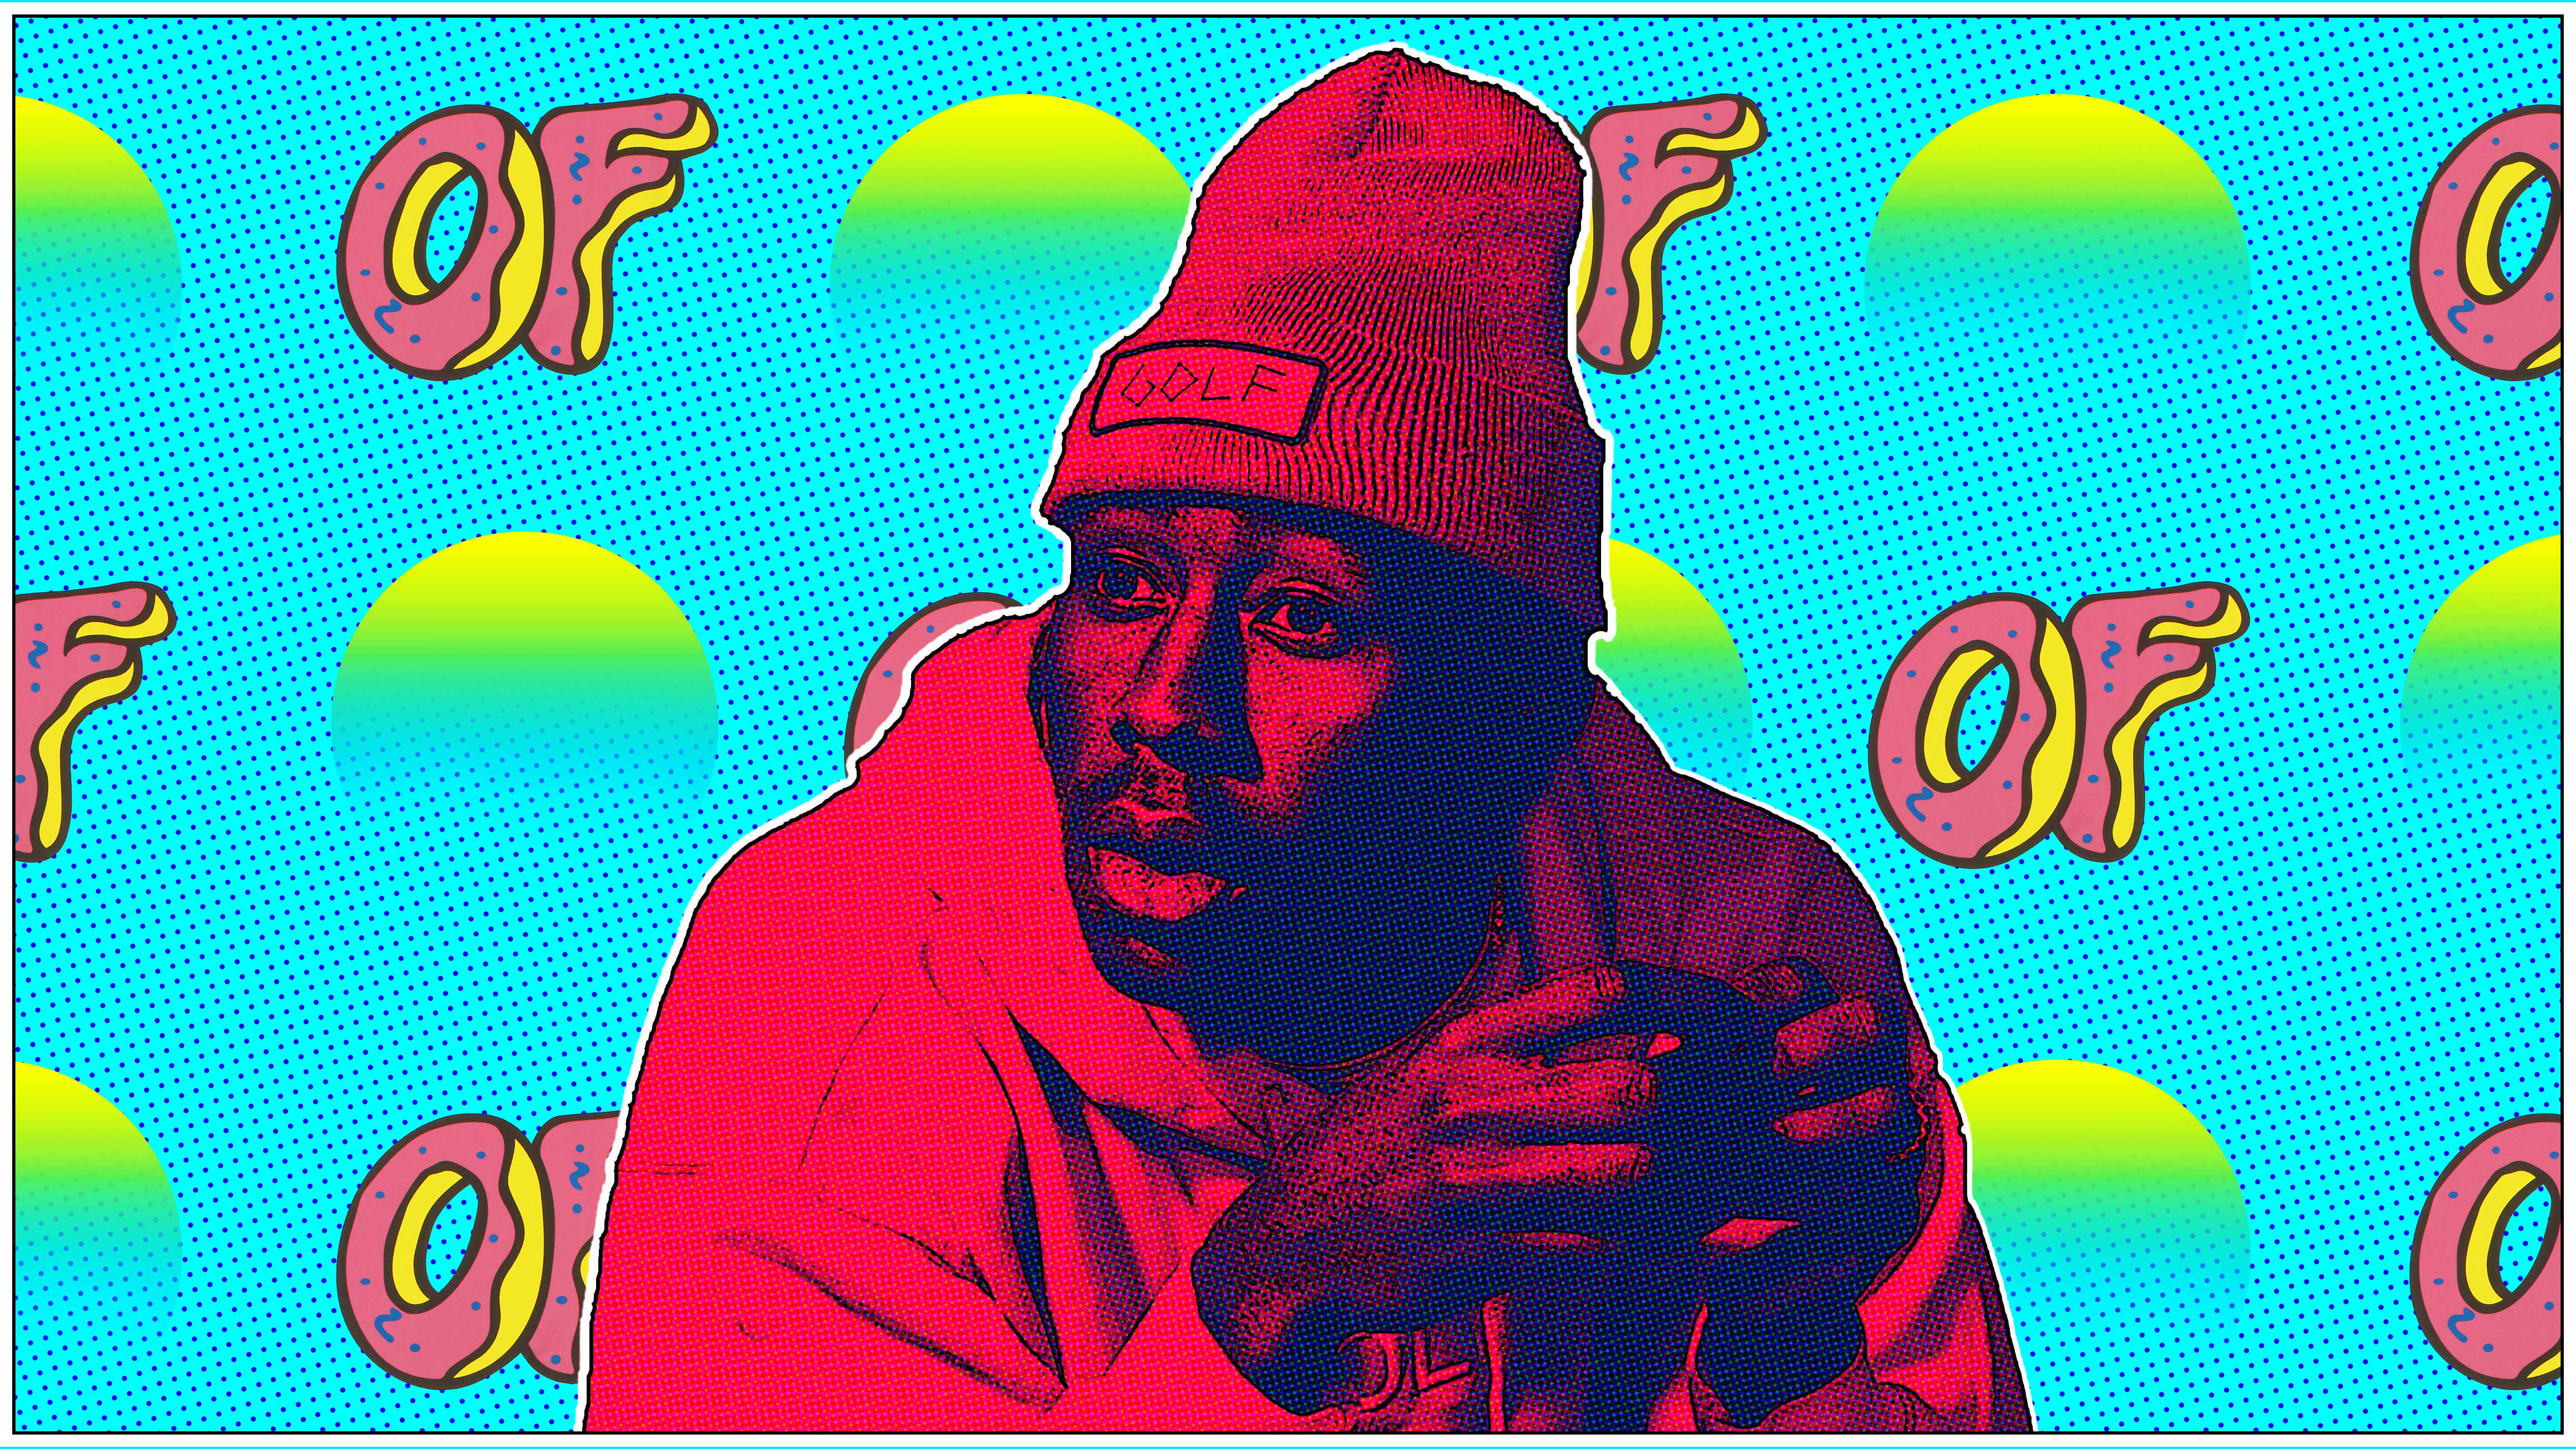 Custom Tyler, the Creator Wallpaper for iPhone and computer